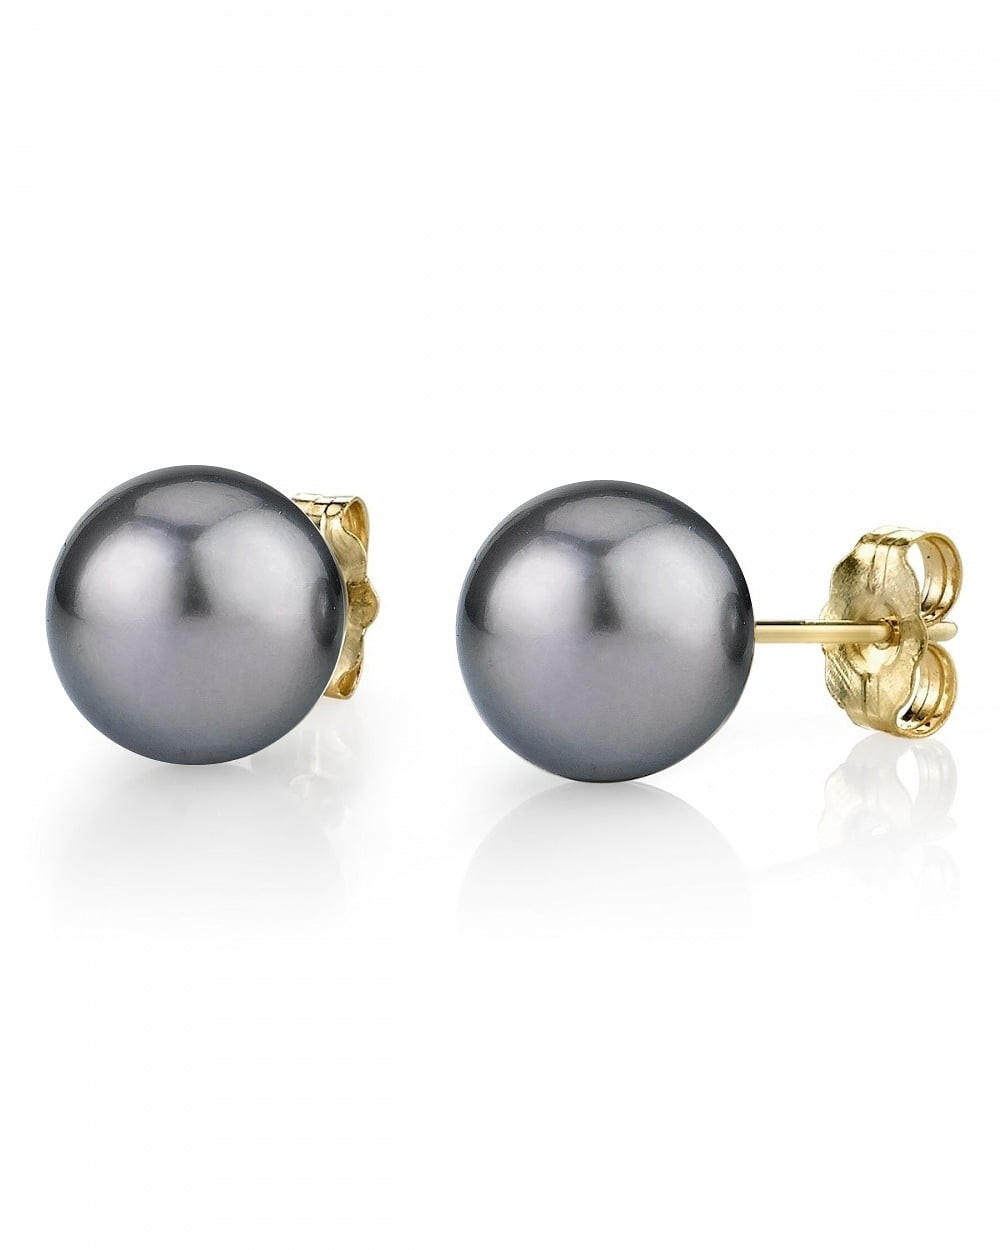 THE PEARL SOURCE 14K Gold 10-11mm Round Tahitian South Sea Cultured Pearl Stud Earrings for Women 